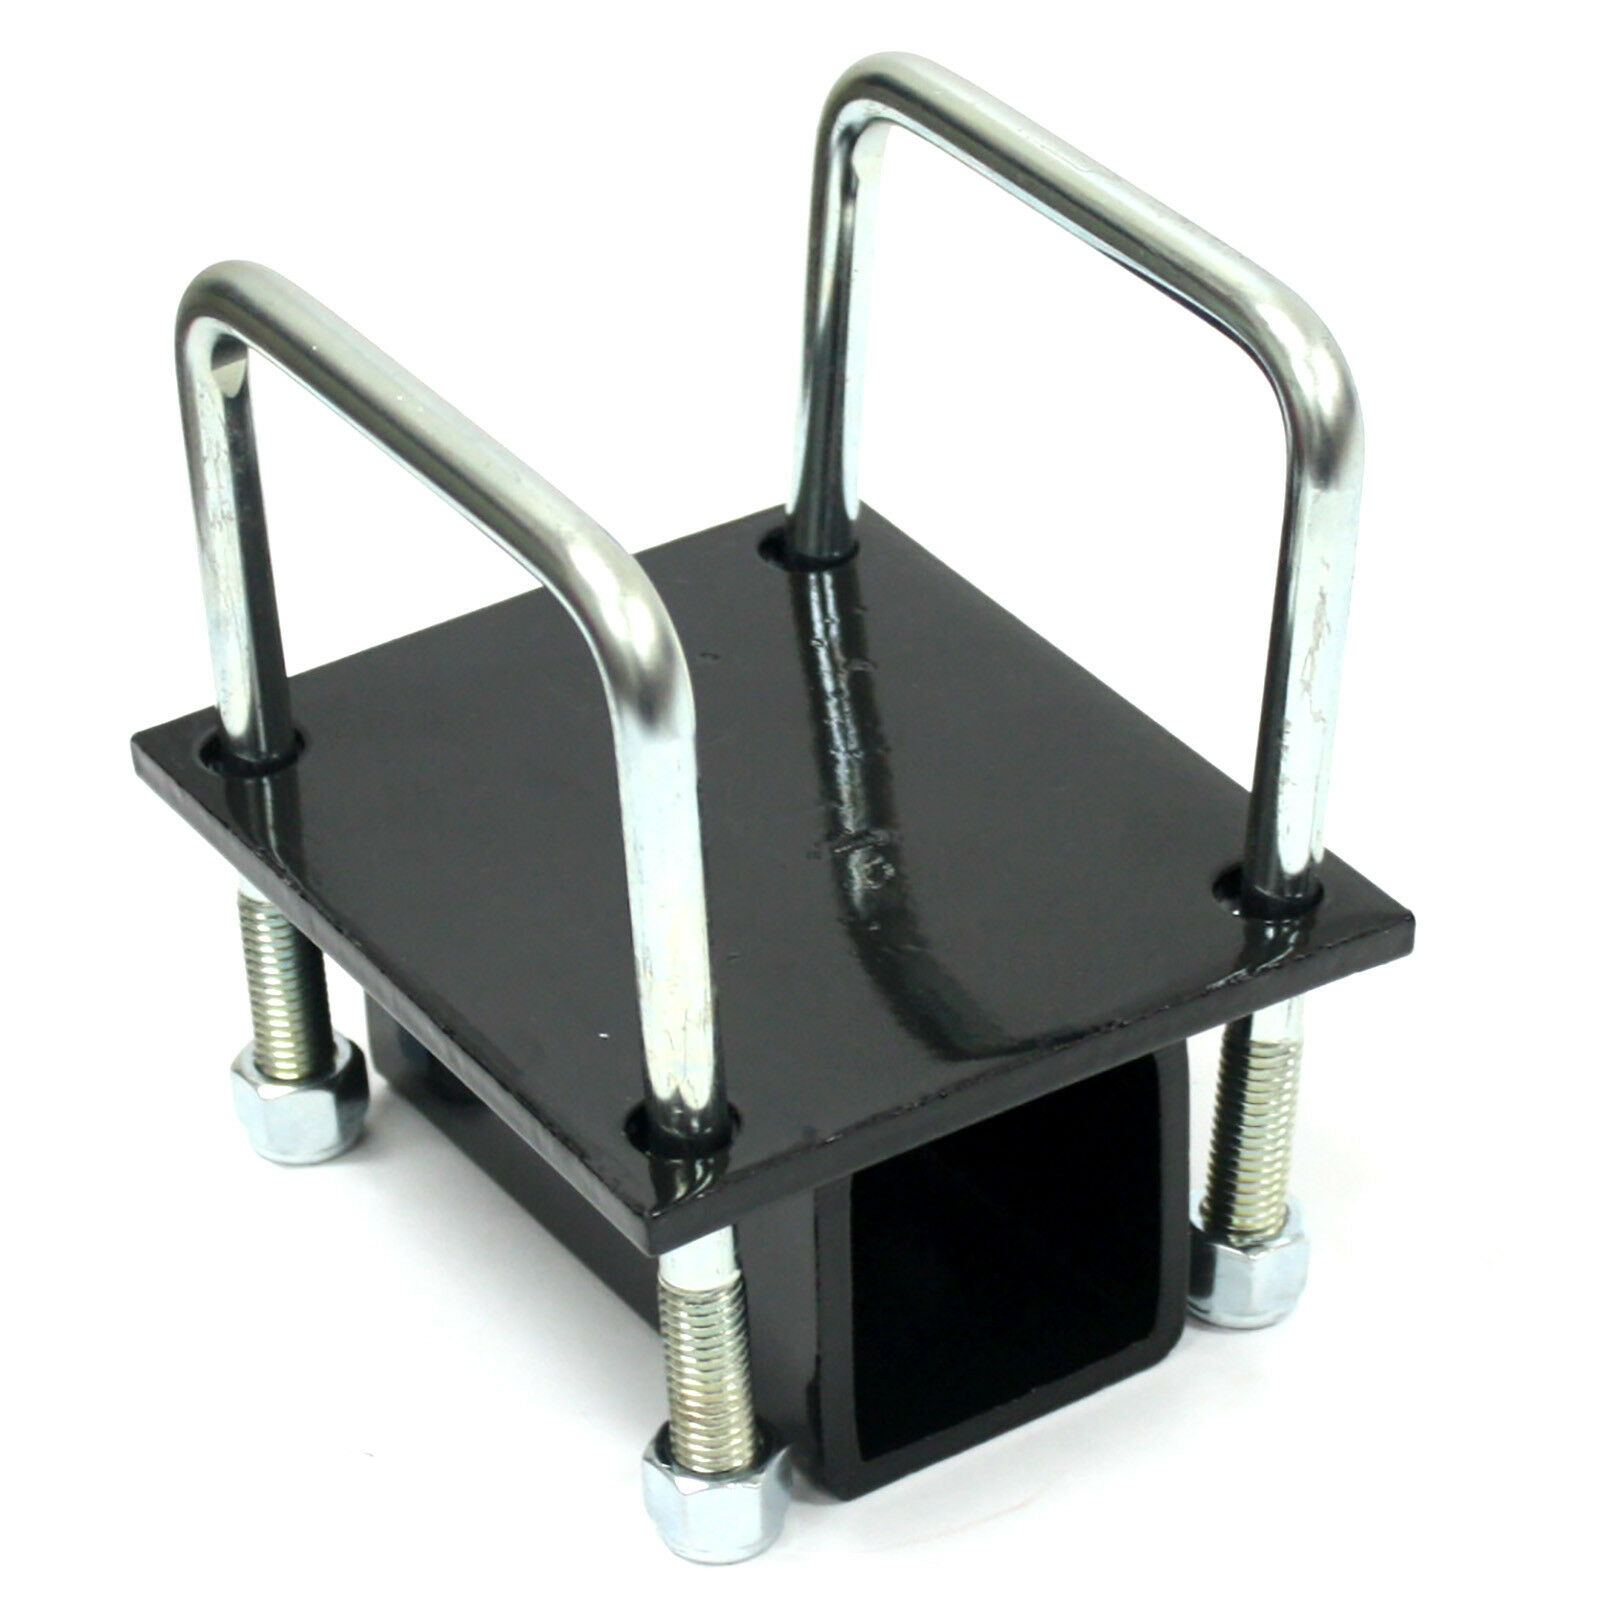 A Pair! ECOTRIC Universal RV 4 Square Bumper Mounting Mounted Cargo Carrier Box Support Arms Bracket Mounting Racks.